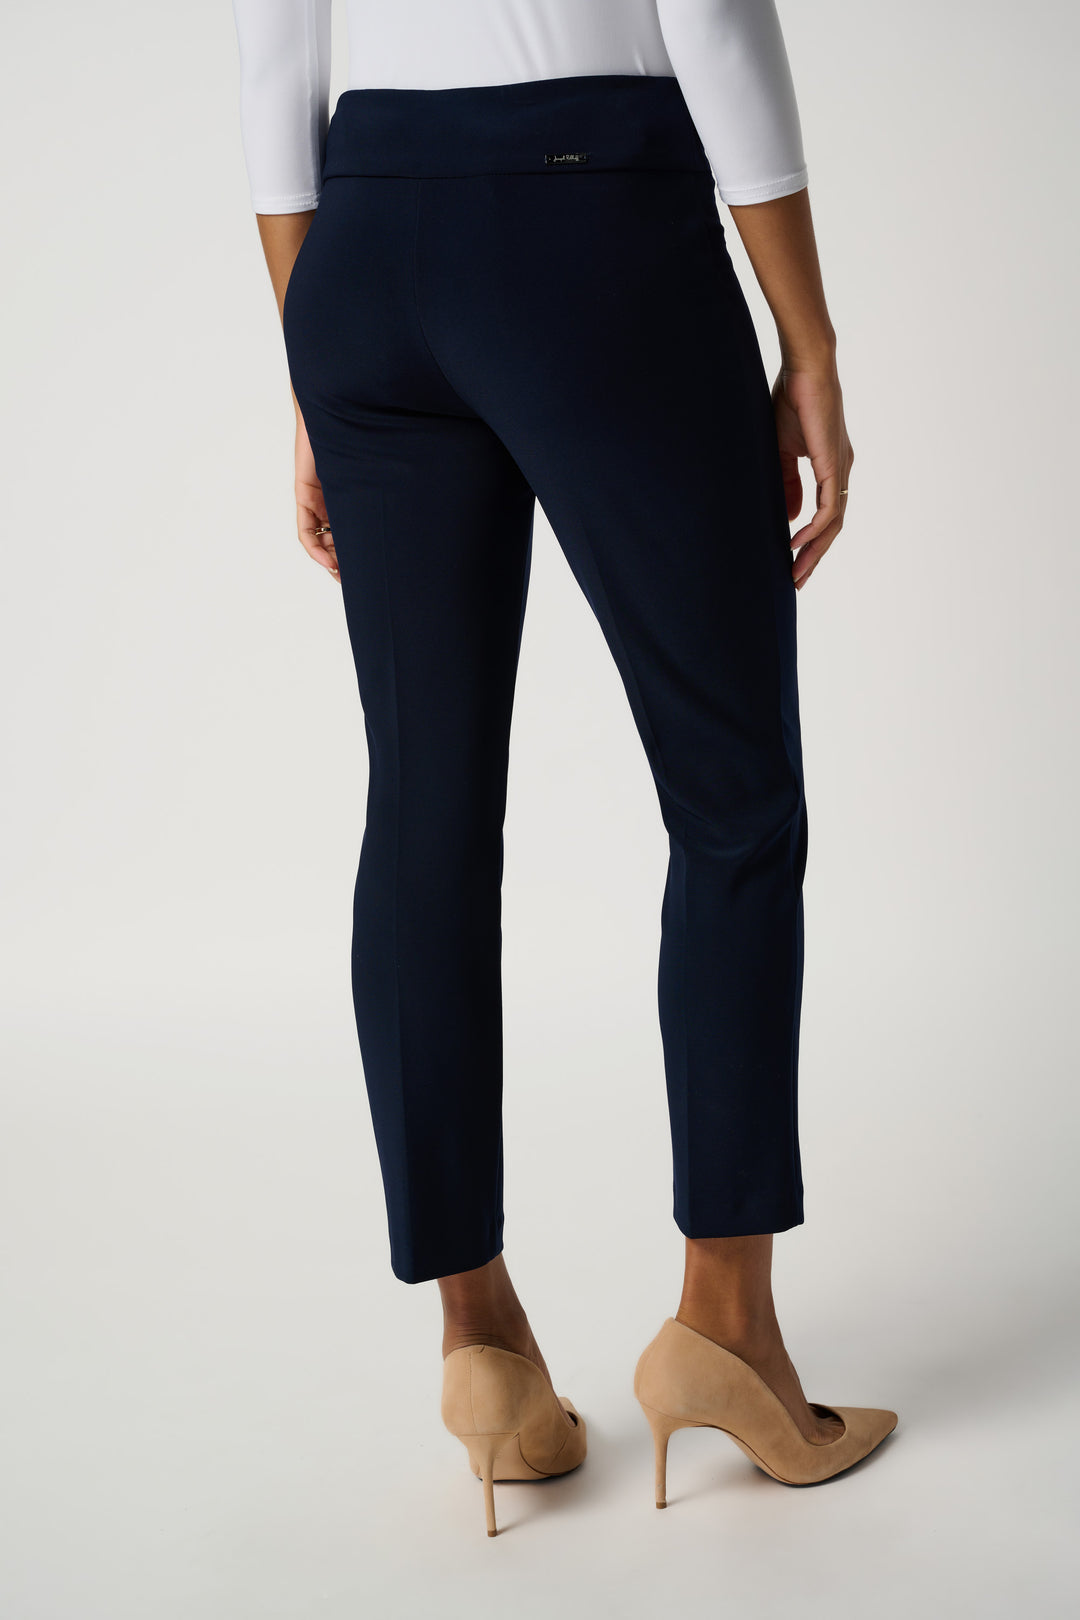 JOSEPH RIBKOFF  STYLE #181089 - 06/JC14 women's business casual cropped ankle dress pant - midnight blue back